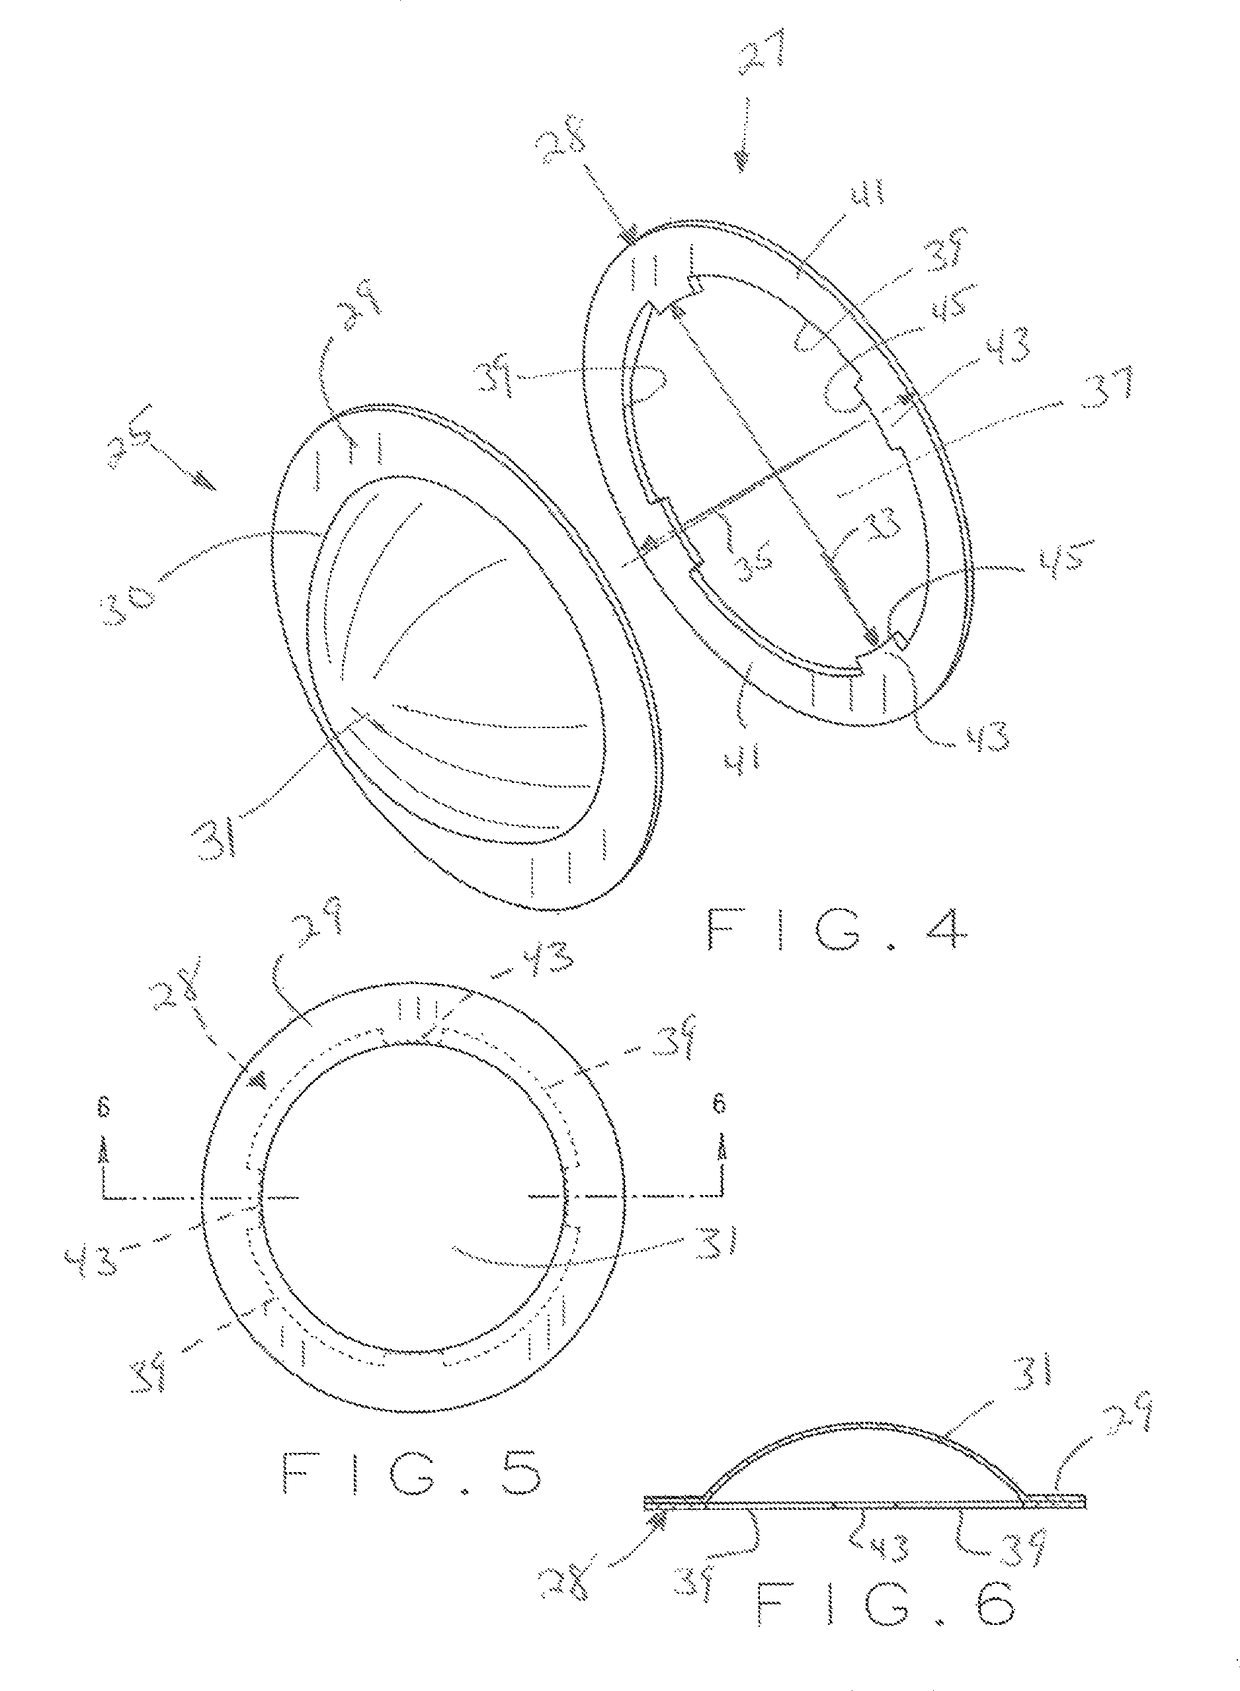 Inlet support structure for a tension acting rupture disc